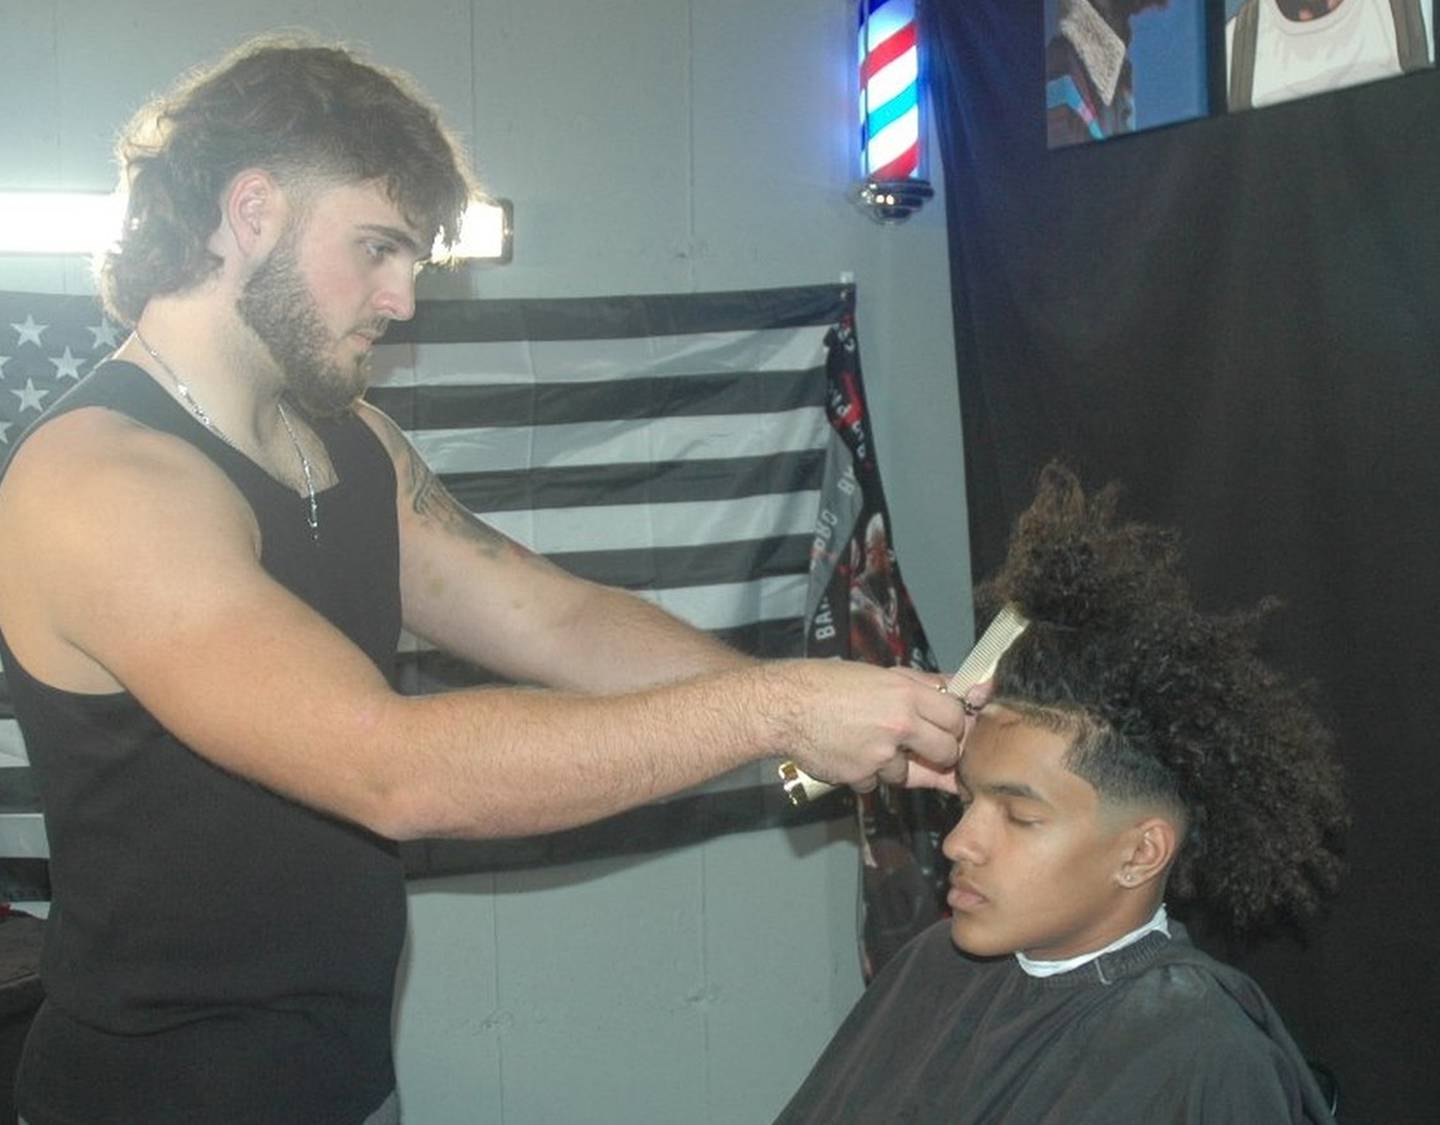 Yorkville's Andrew Laurich, who has taken his interest in cutting hair to the next level, works on teammate Isaiah Brown on Tuesday, Nov. 8, 2022.